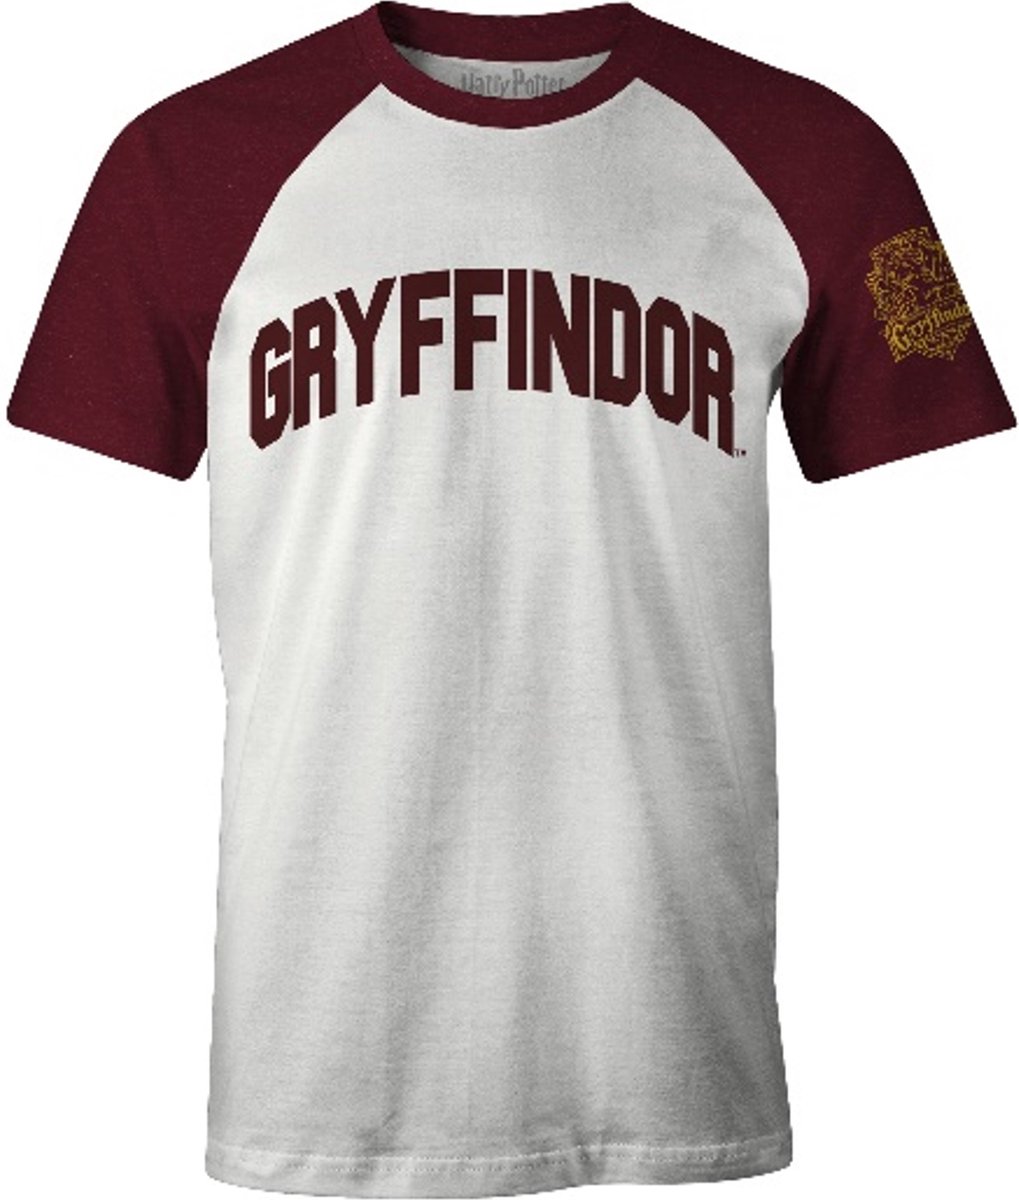 Harry Potter - Gryffindor White & Red T-Shirt - XL